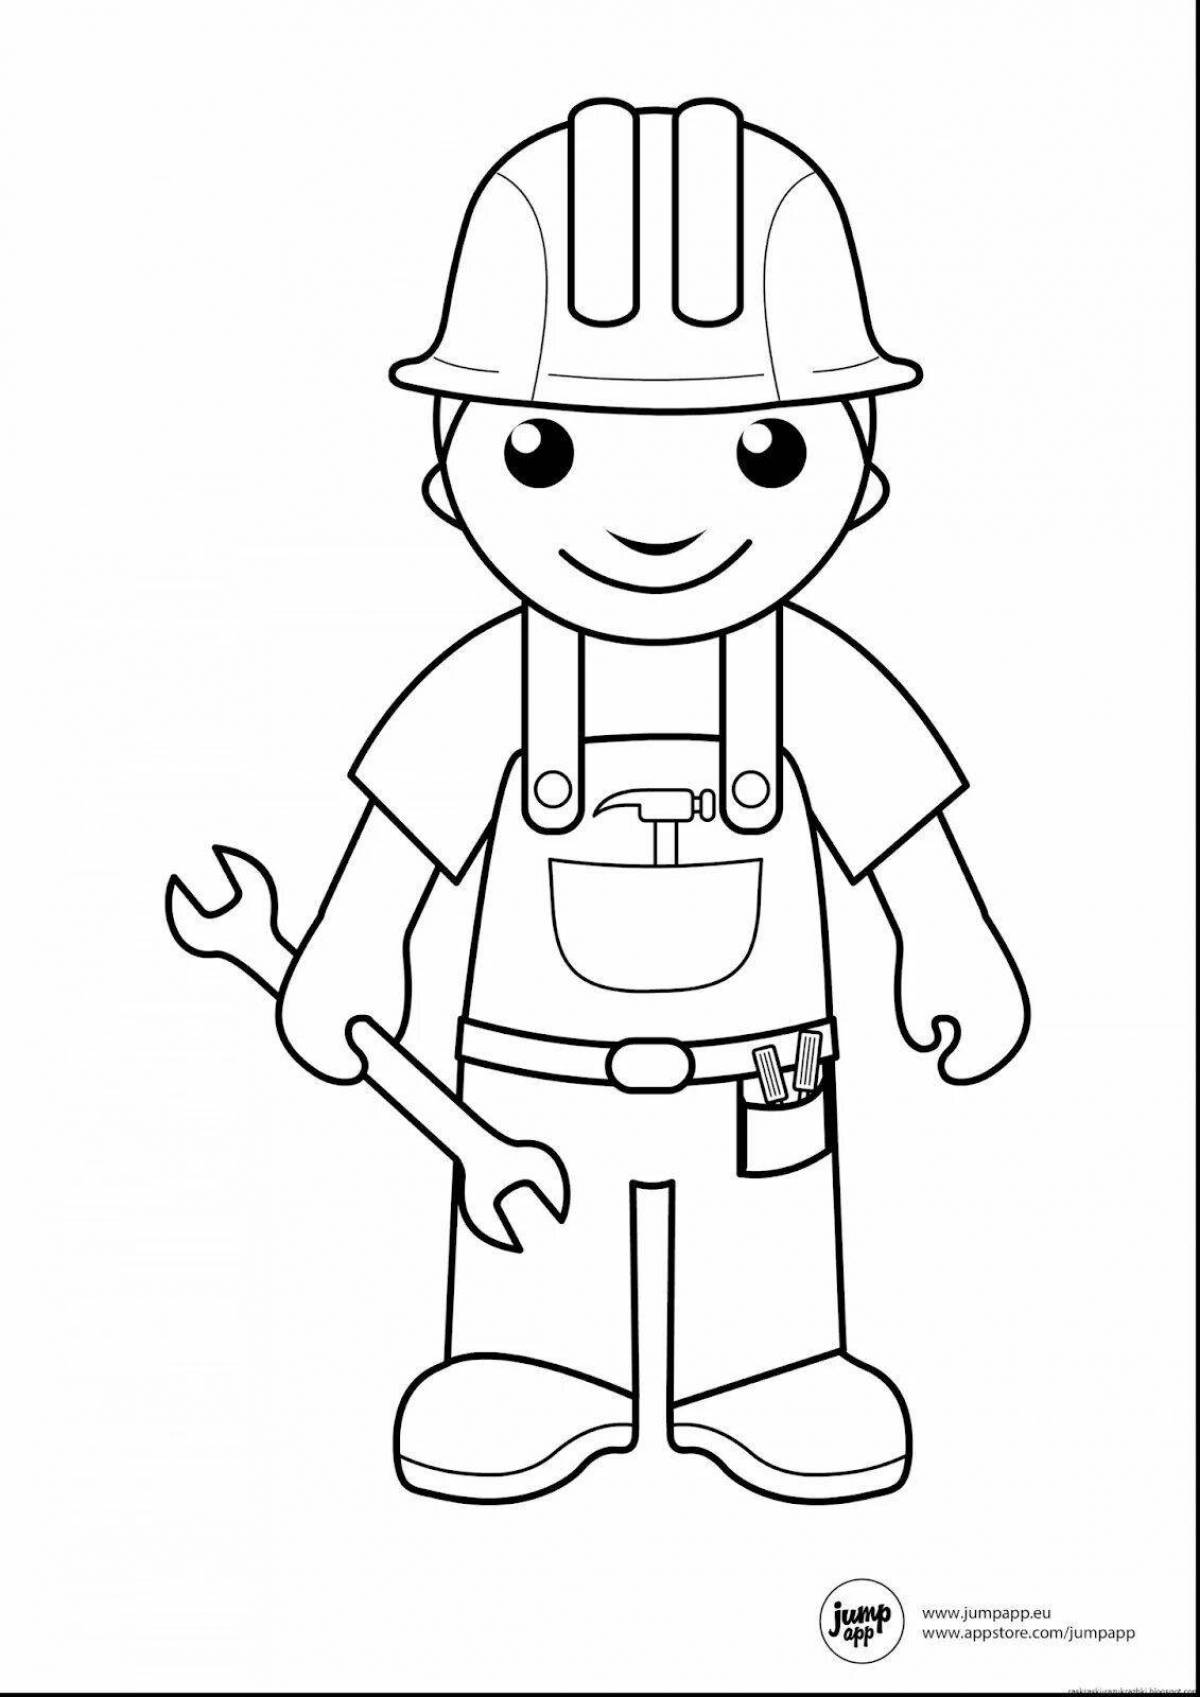 Inspirational job coloring pages middle group